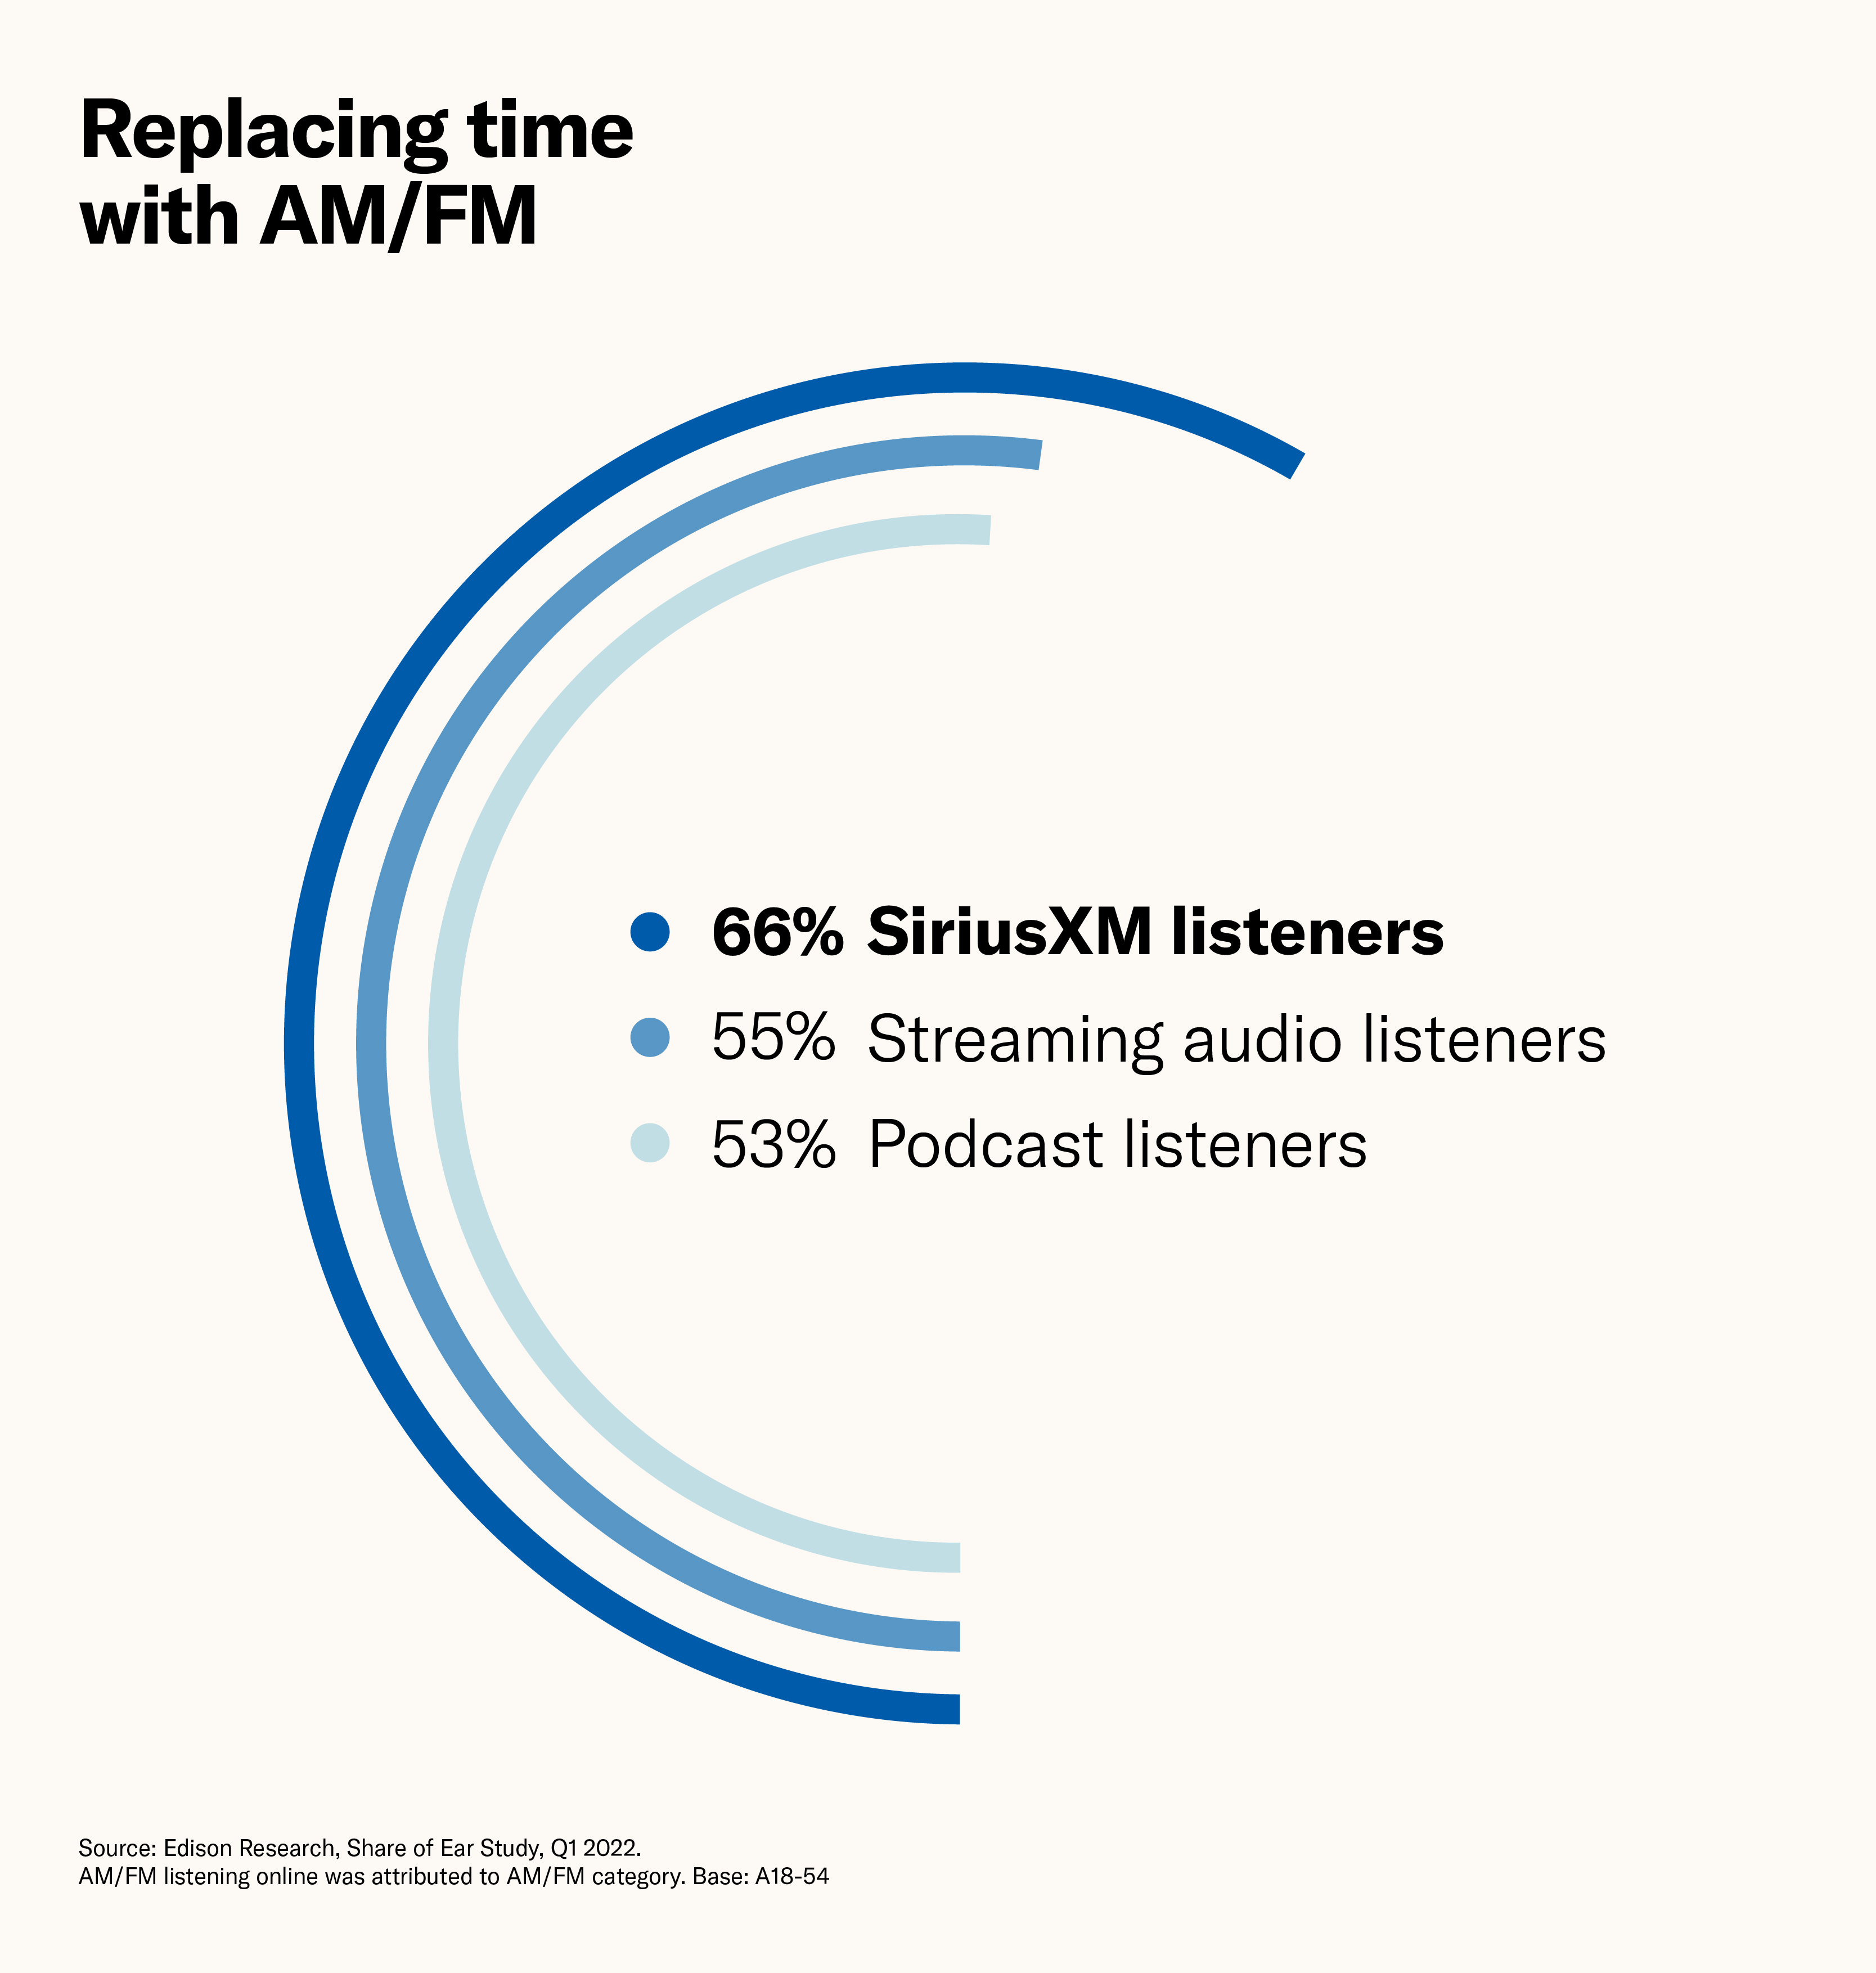 Replacing time with AM/FM with SiriusXM